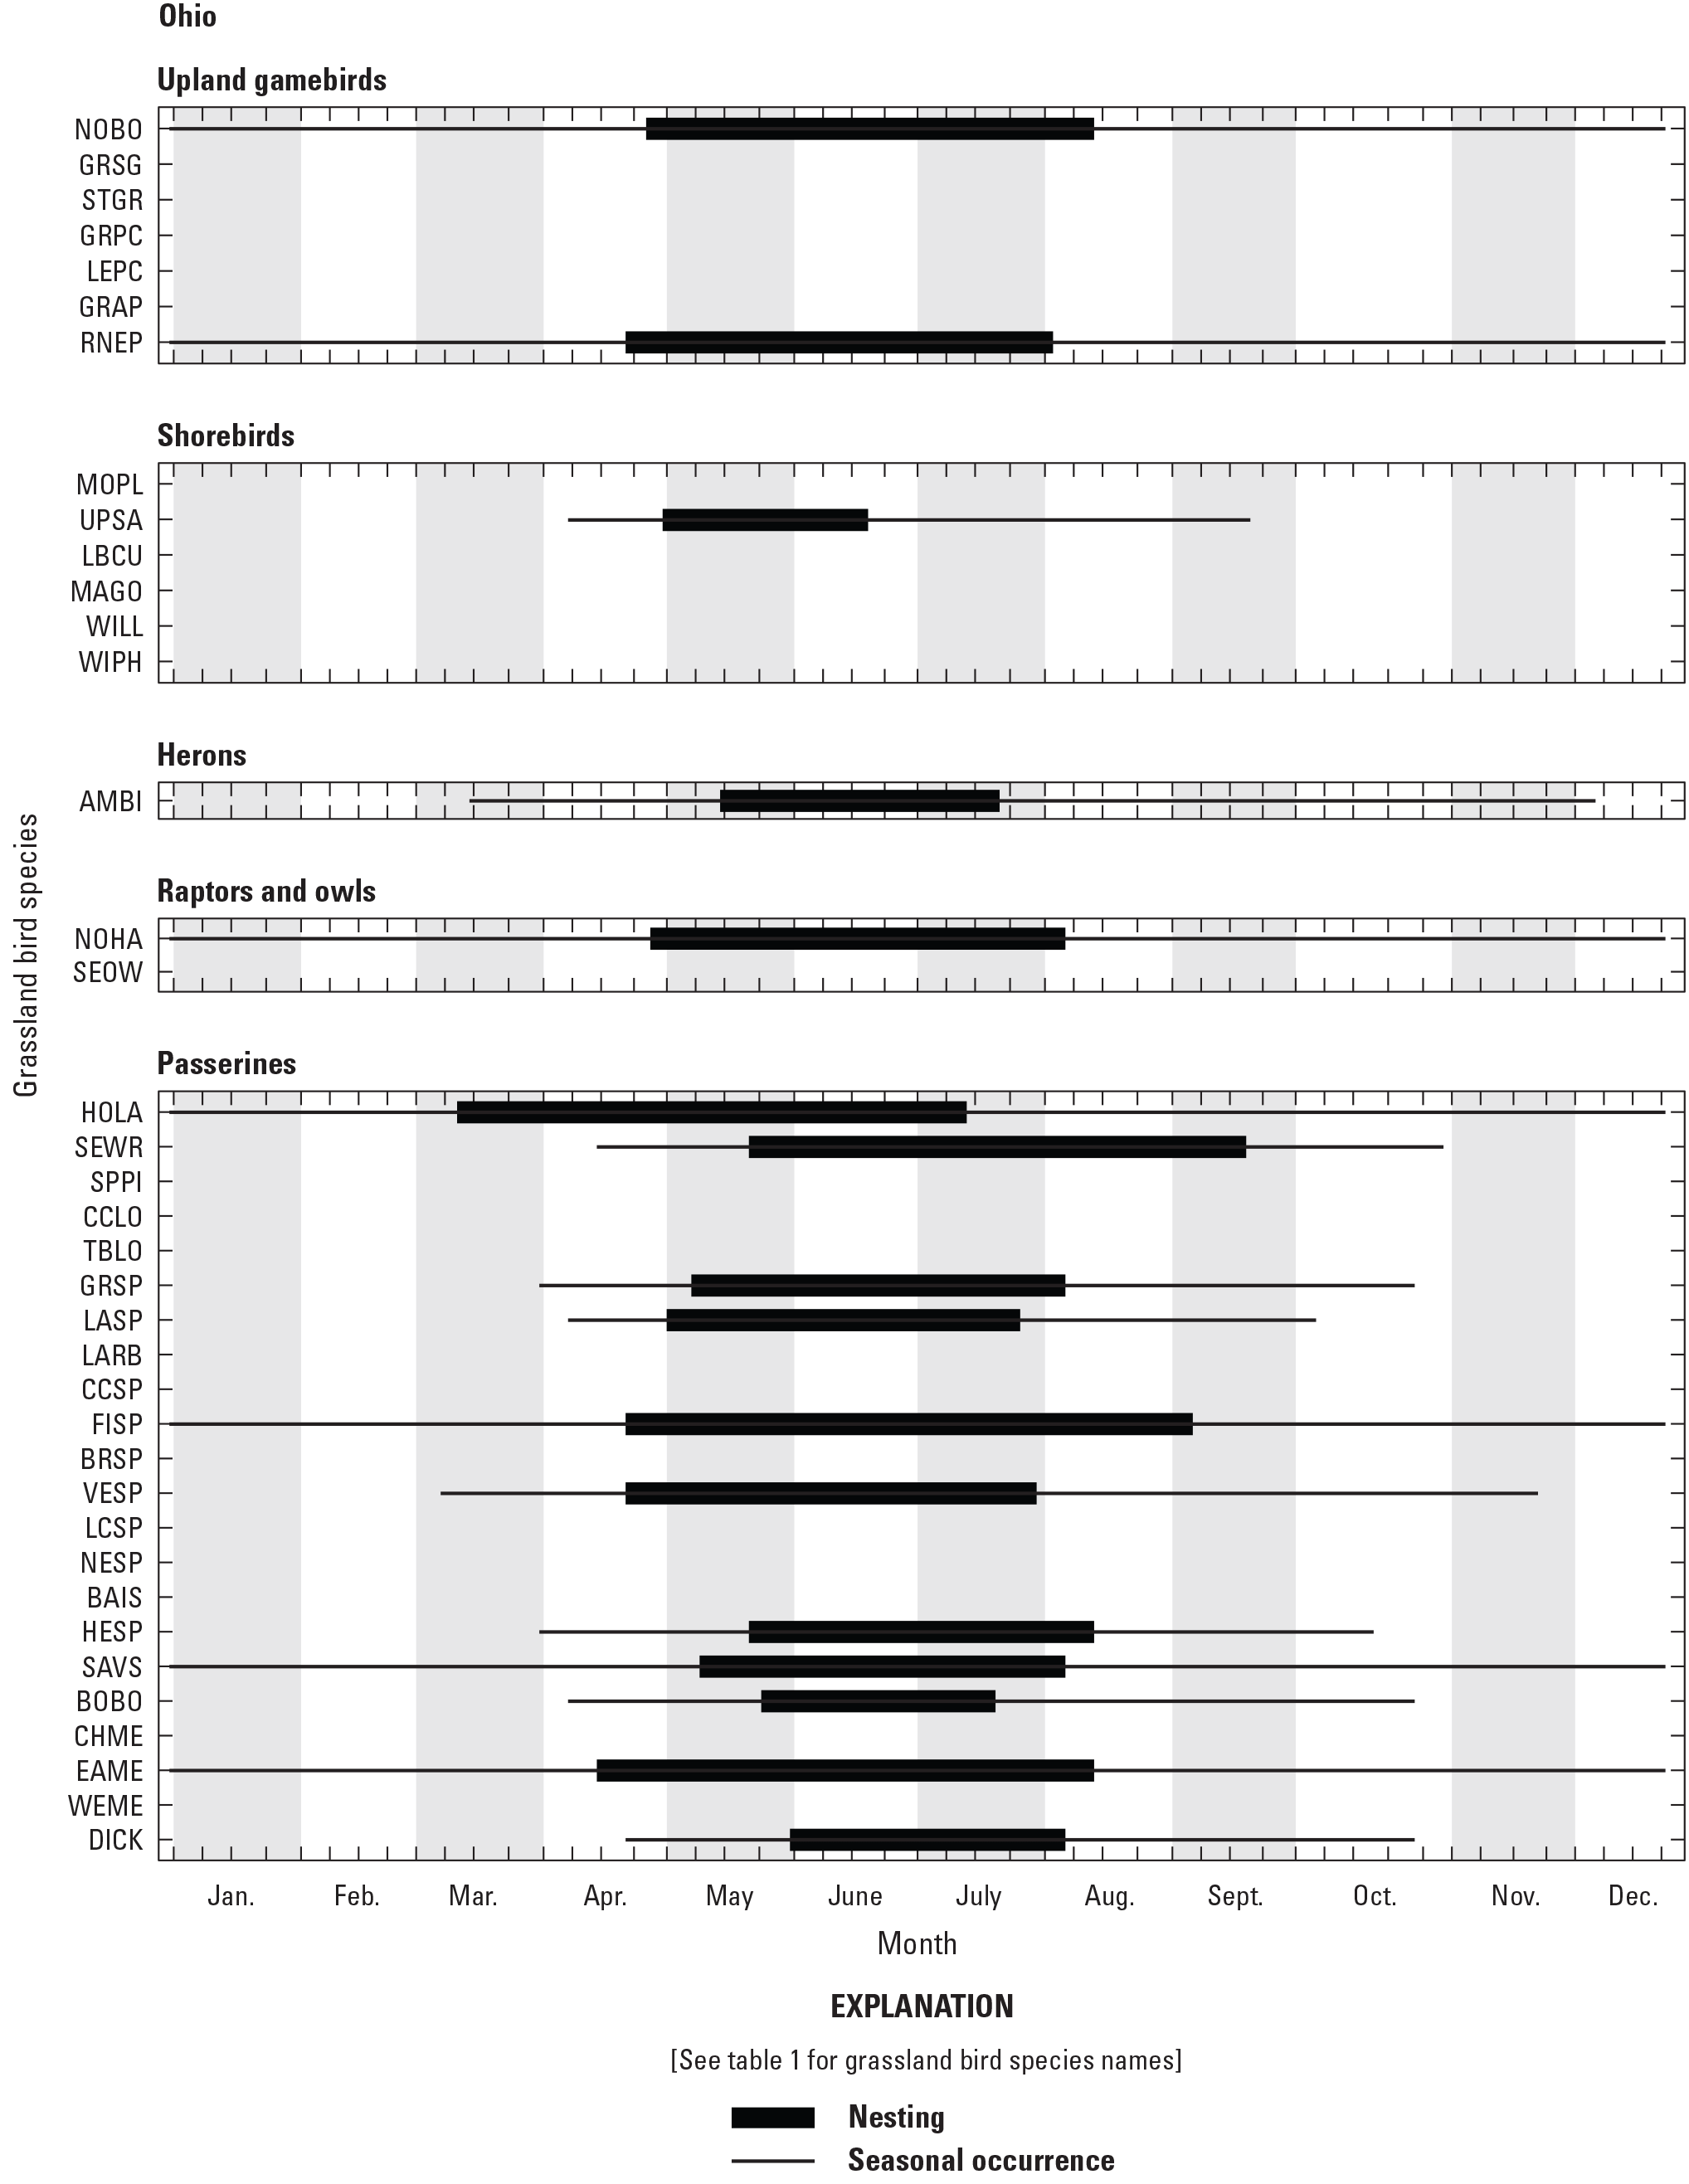 Figure showing seasonal occurrence and nesting phenology for 38 grassland bird species
               in Ohio, United States.